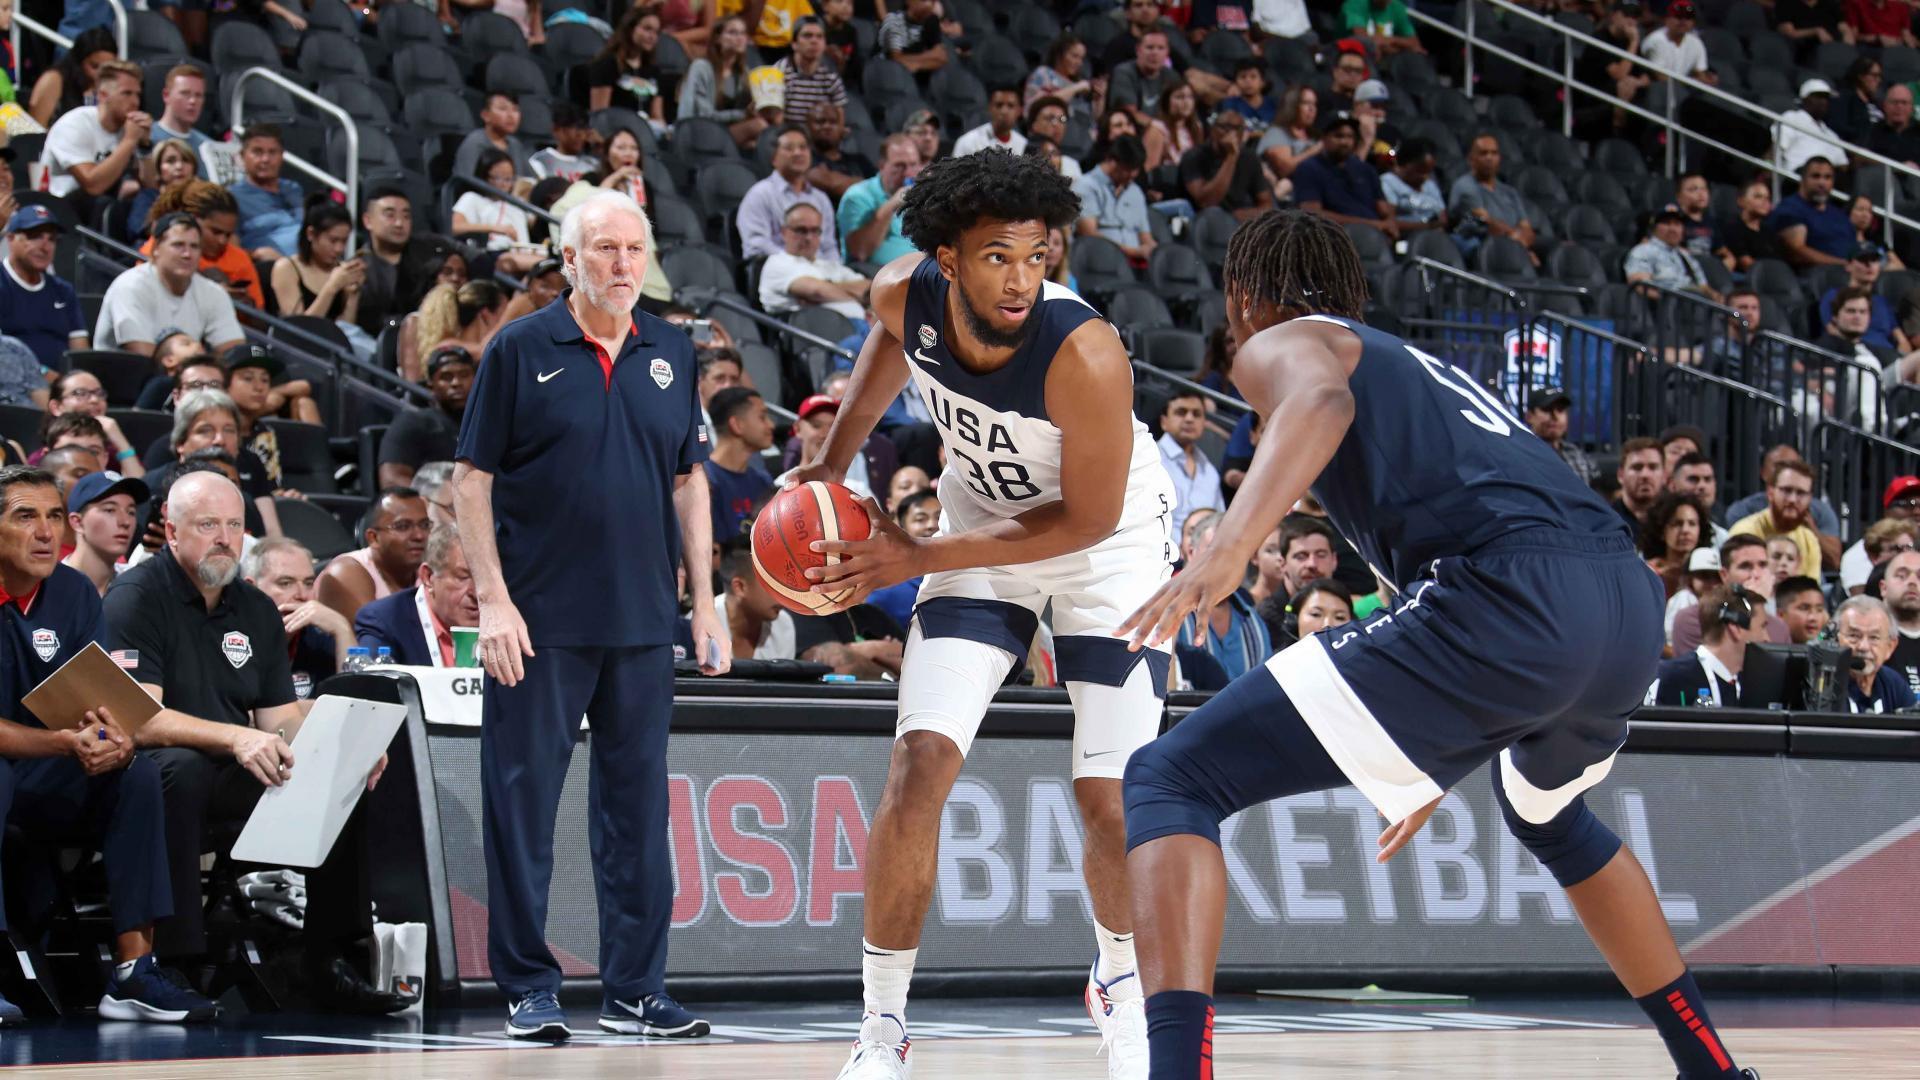 USA Basketball plays first scrimmage in advance of FIBA World Cup